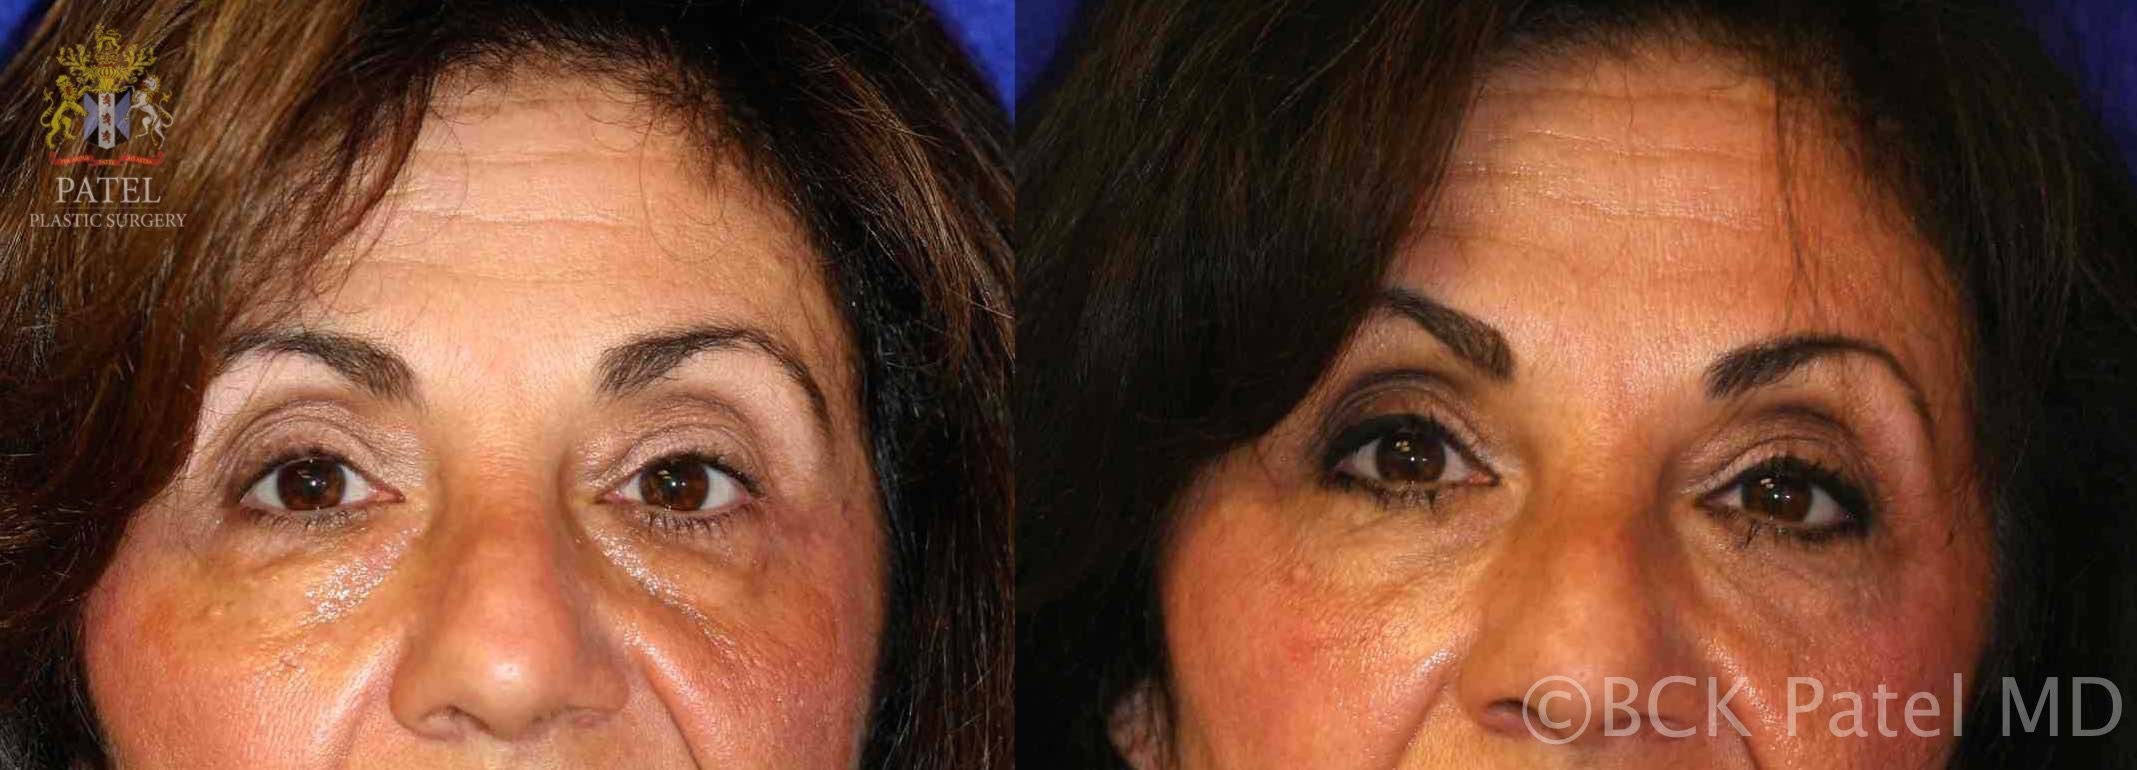 englishsurgeon.com. Photos showing improvement in lower eyelids and cheeks with fillers. BCK Patel MD, FRCS